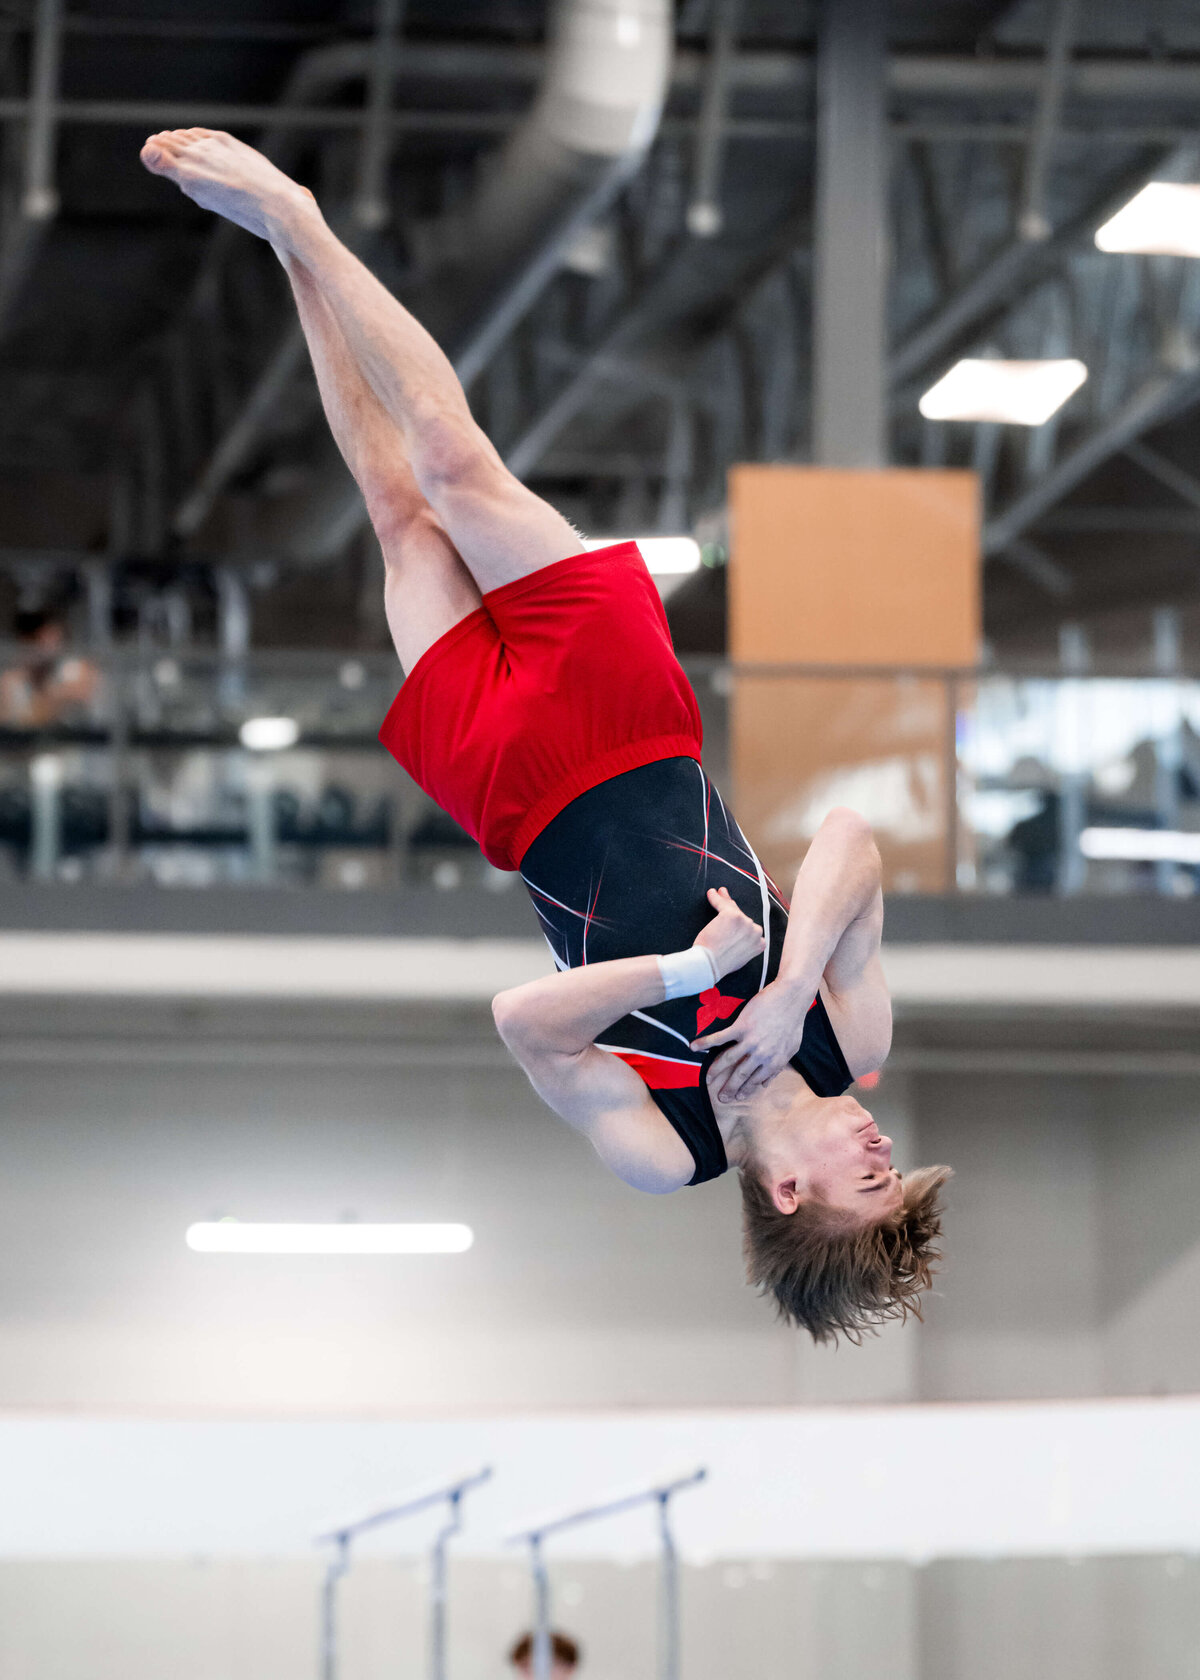 Photo by Luke O'Geil taken at the 2023 inaugural Grizzly Classic men's artistic gymnastics competitionA1_03093